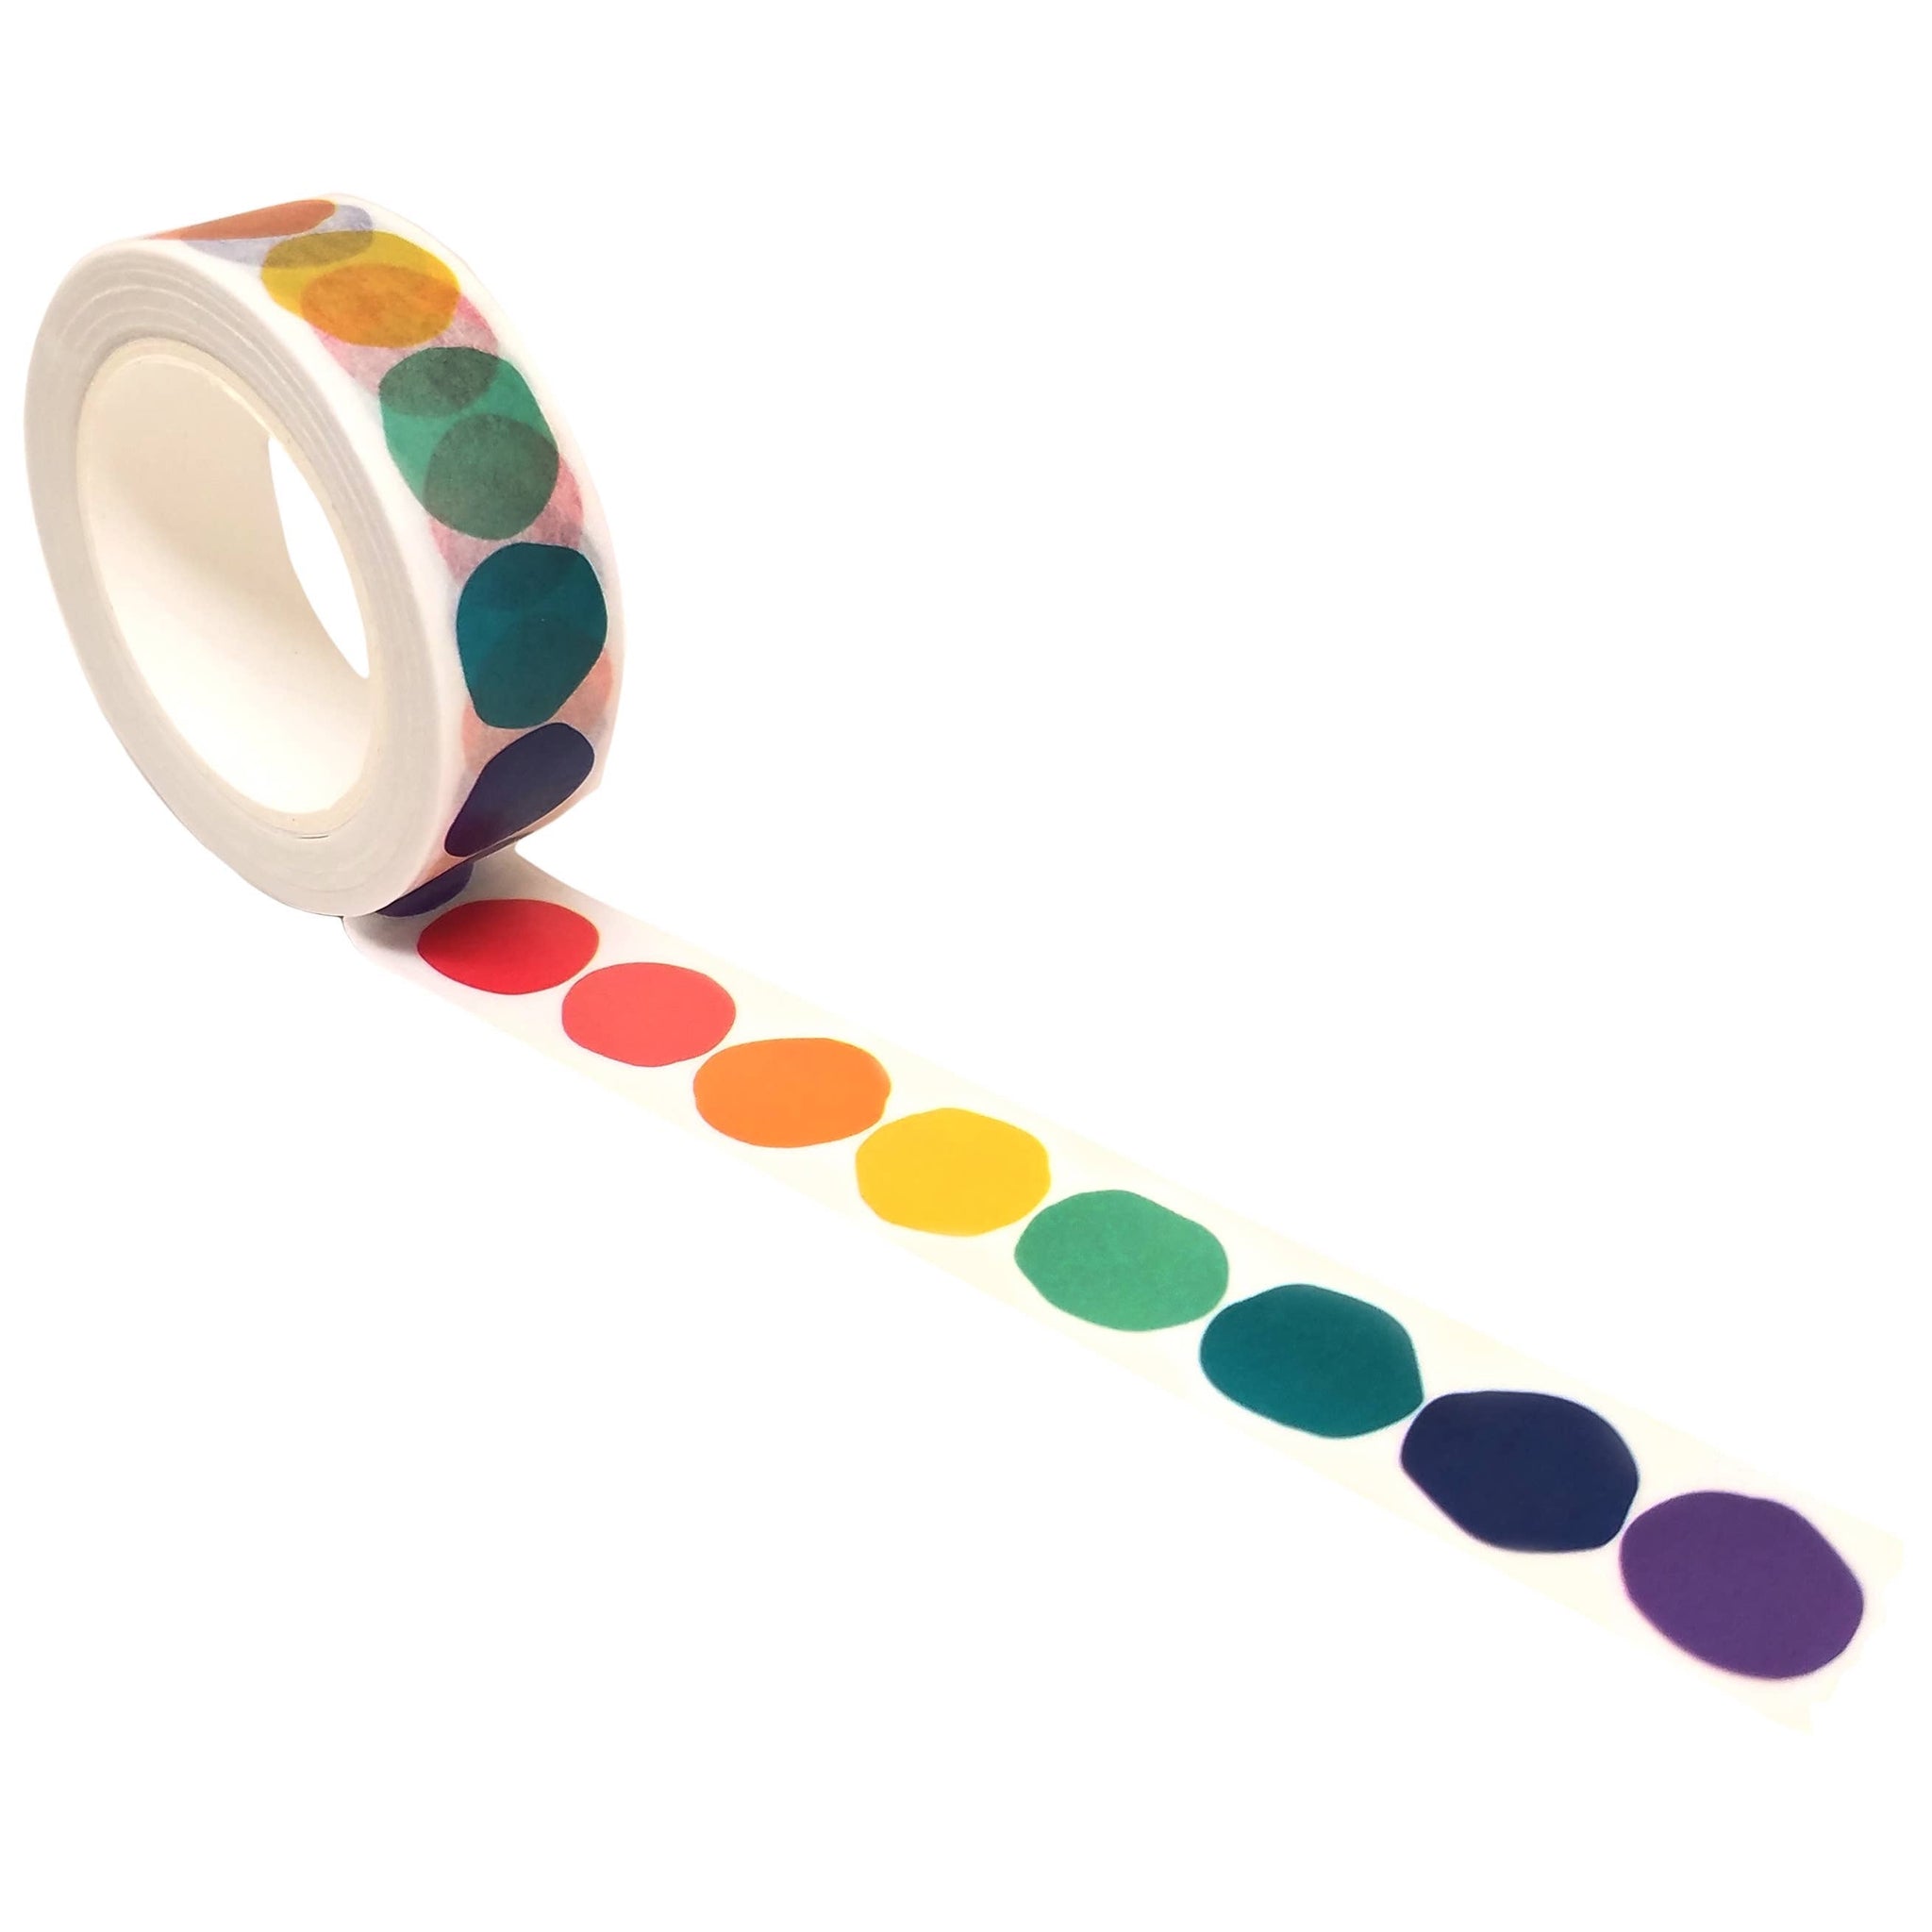 What Is Washi Tape? Is It Similar To Normal Adhesive Tape?